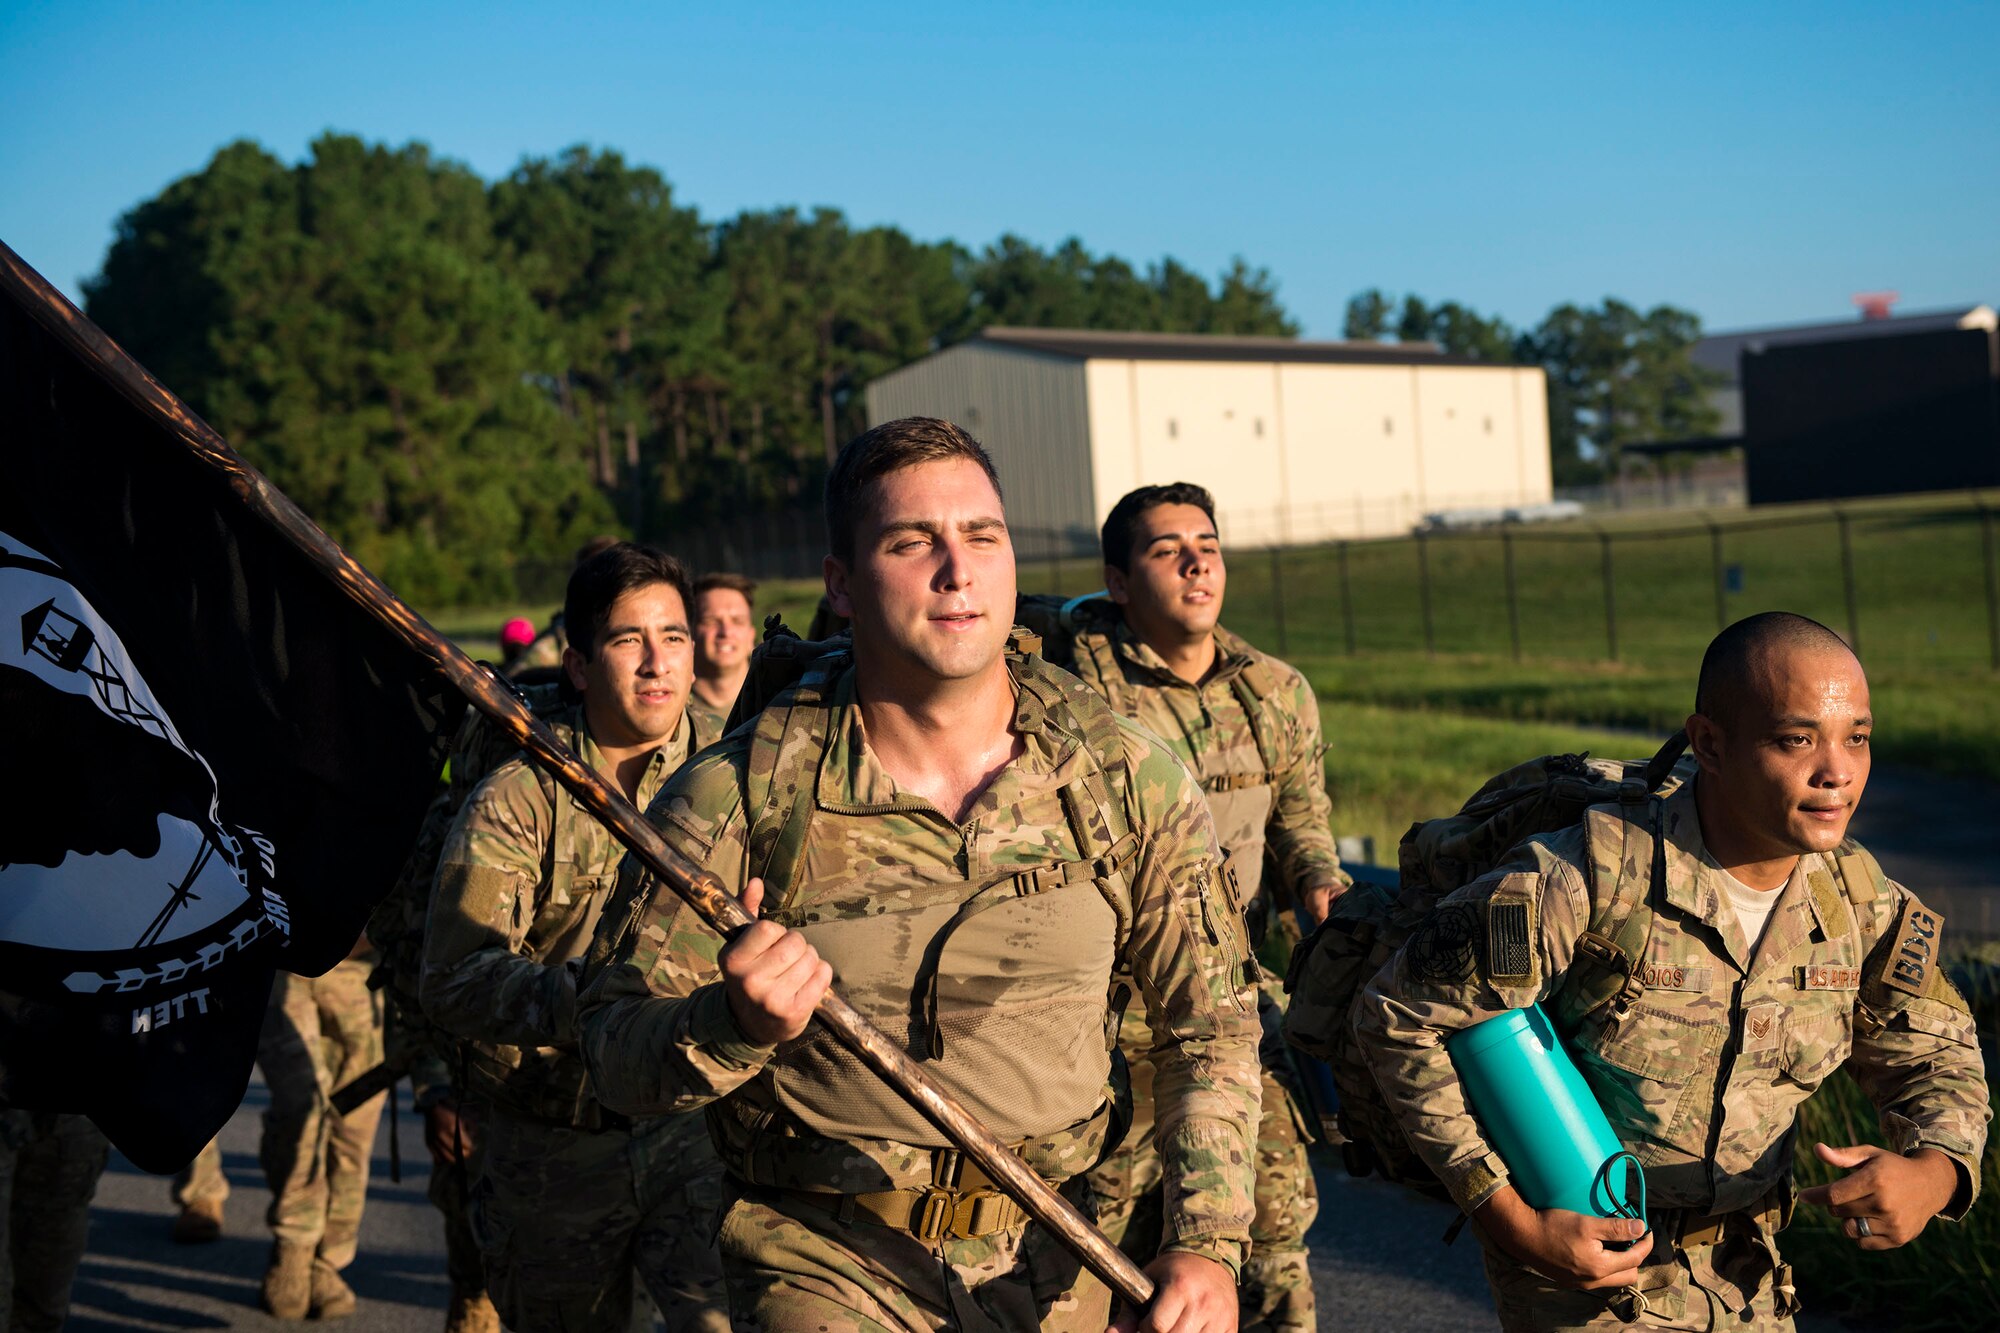 Airmen from the 822d Base Defense Squadron run during the POW/MIA Recognition Day ruck march, Sept. 21, 2018, at Moody Air Force Base, Ga. For the first-time, the 347th Operations Support Squadron hosted a ruck march to pay tribute to those who’ve been captured or missing in the line of duty by carrying a POW/MIA flag for 24 hours. (U.S. Air Force photo by Airman 1st Class Erick Requadt)